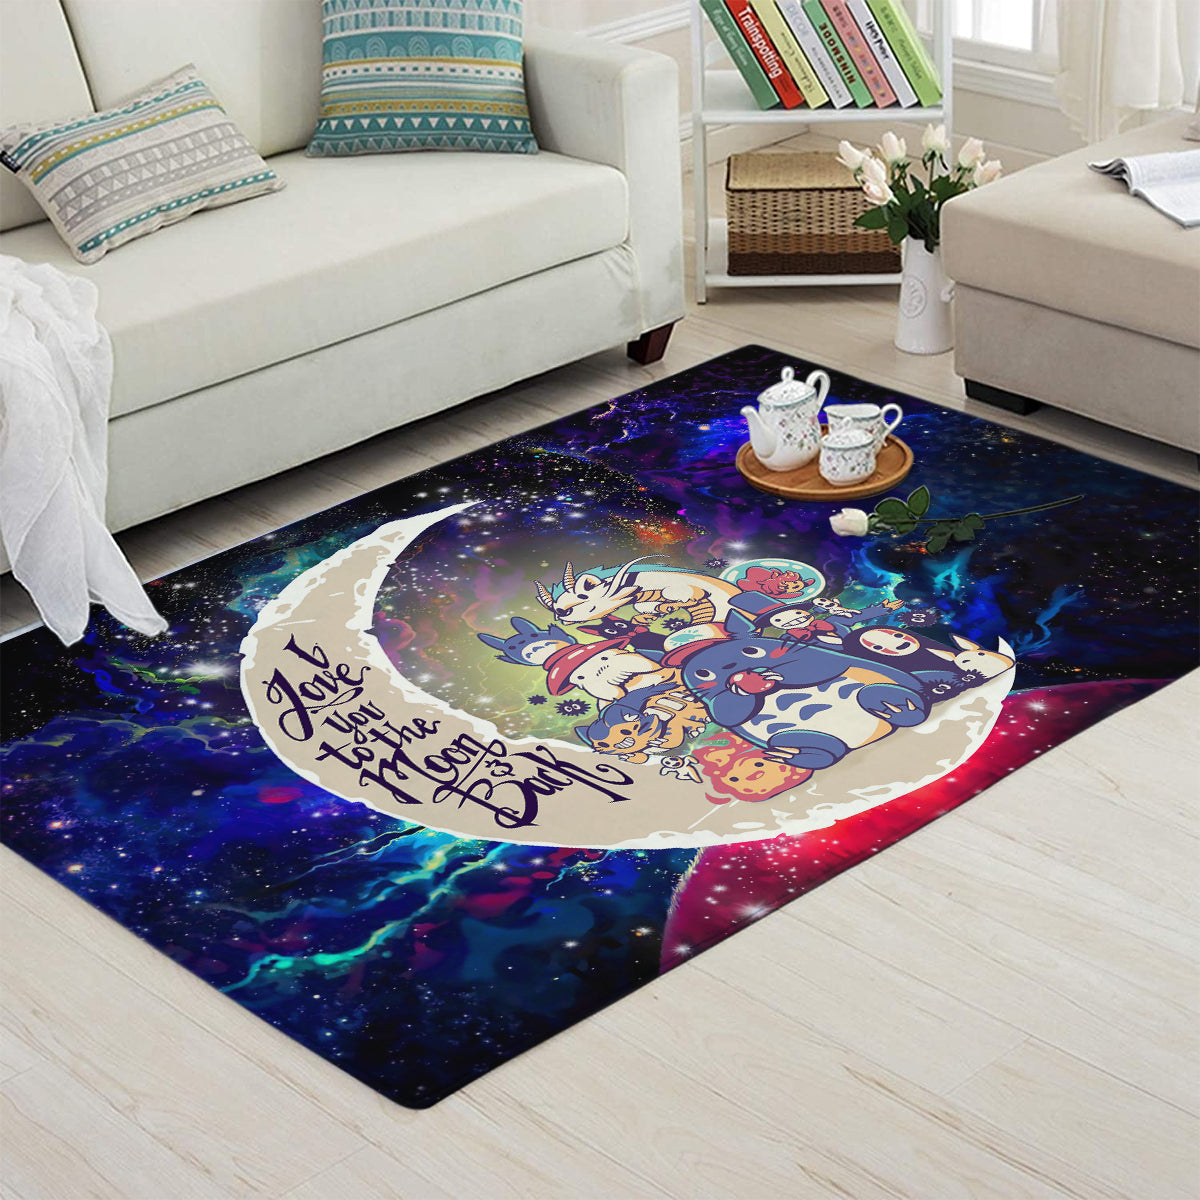 Ghibli Character Love You To The Moon Galaxy Carpet Rug Home Room Decor